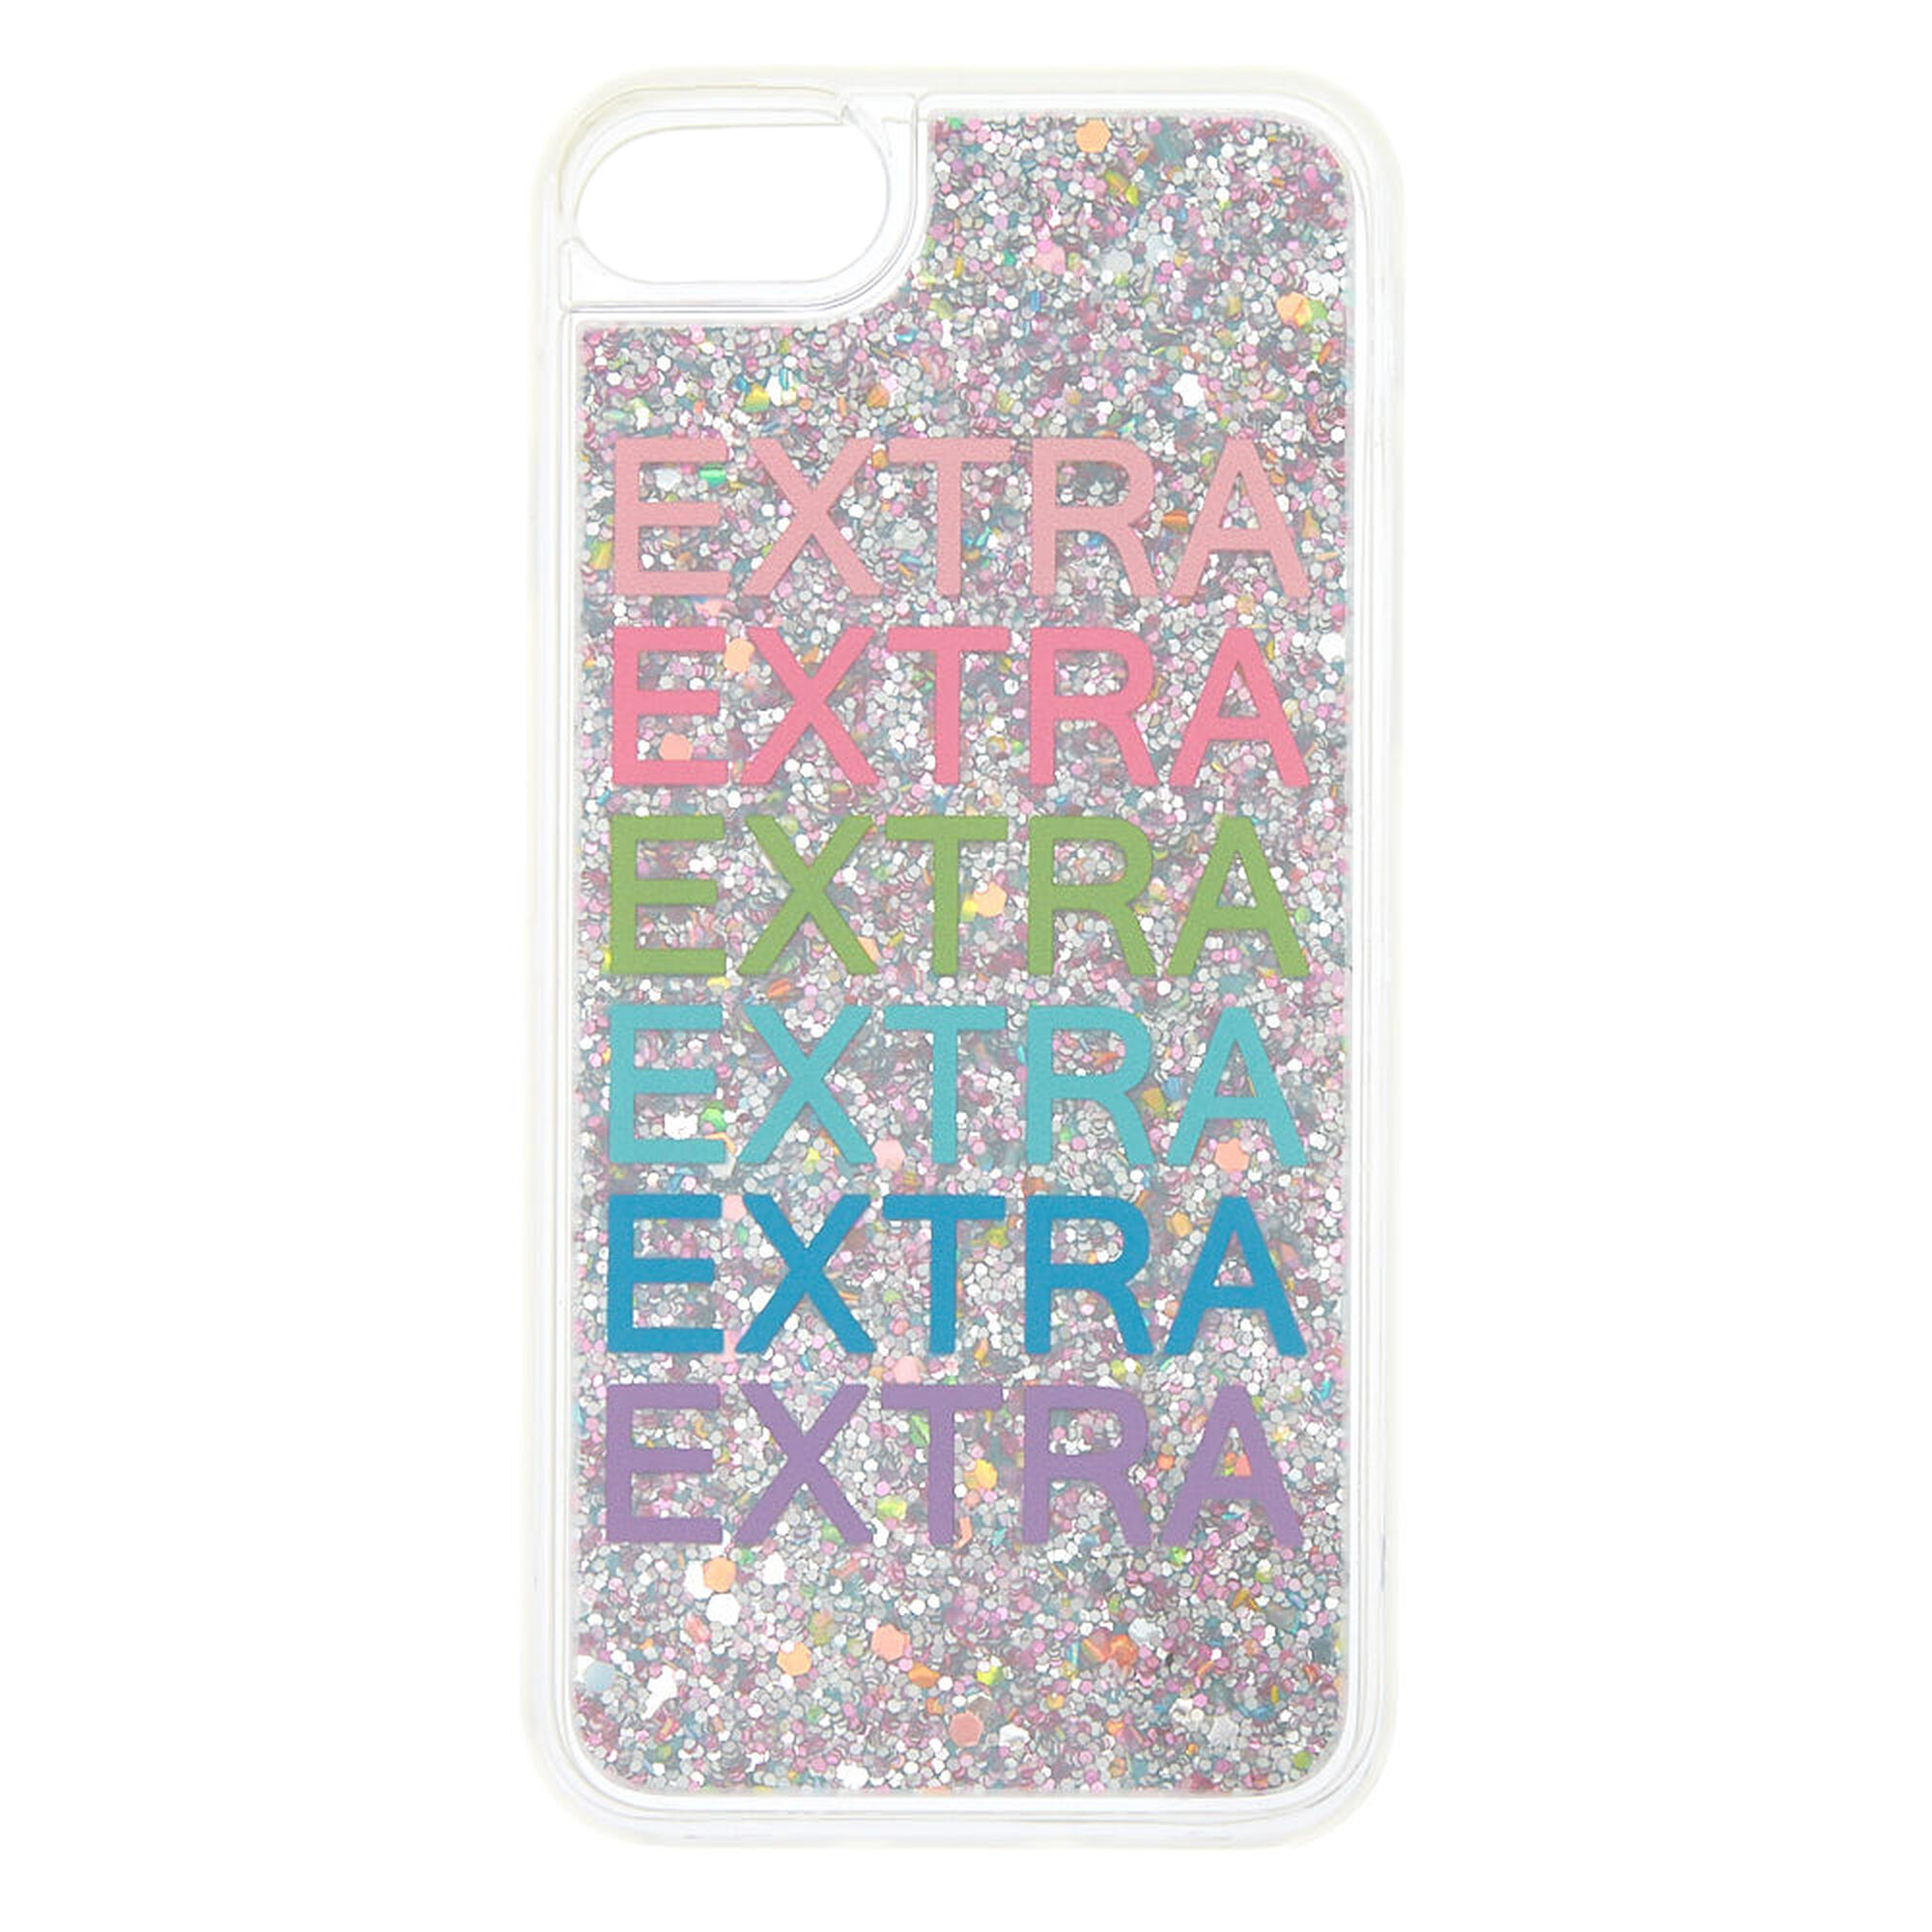 Extra Glitter Phone Case - Fits iPhone 6/7/8 Plus | Claire's US